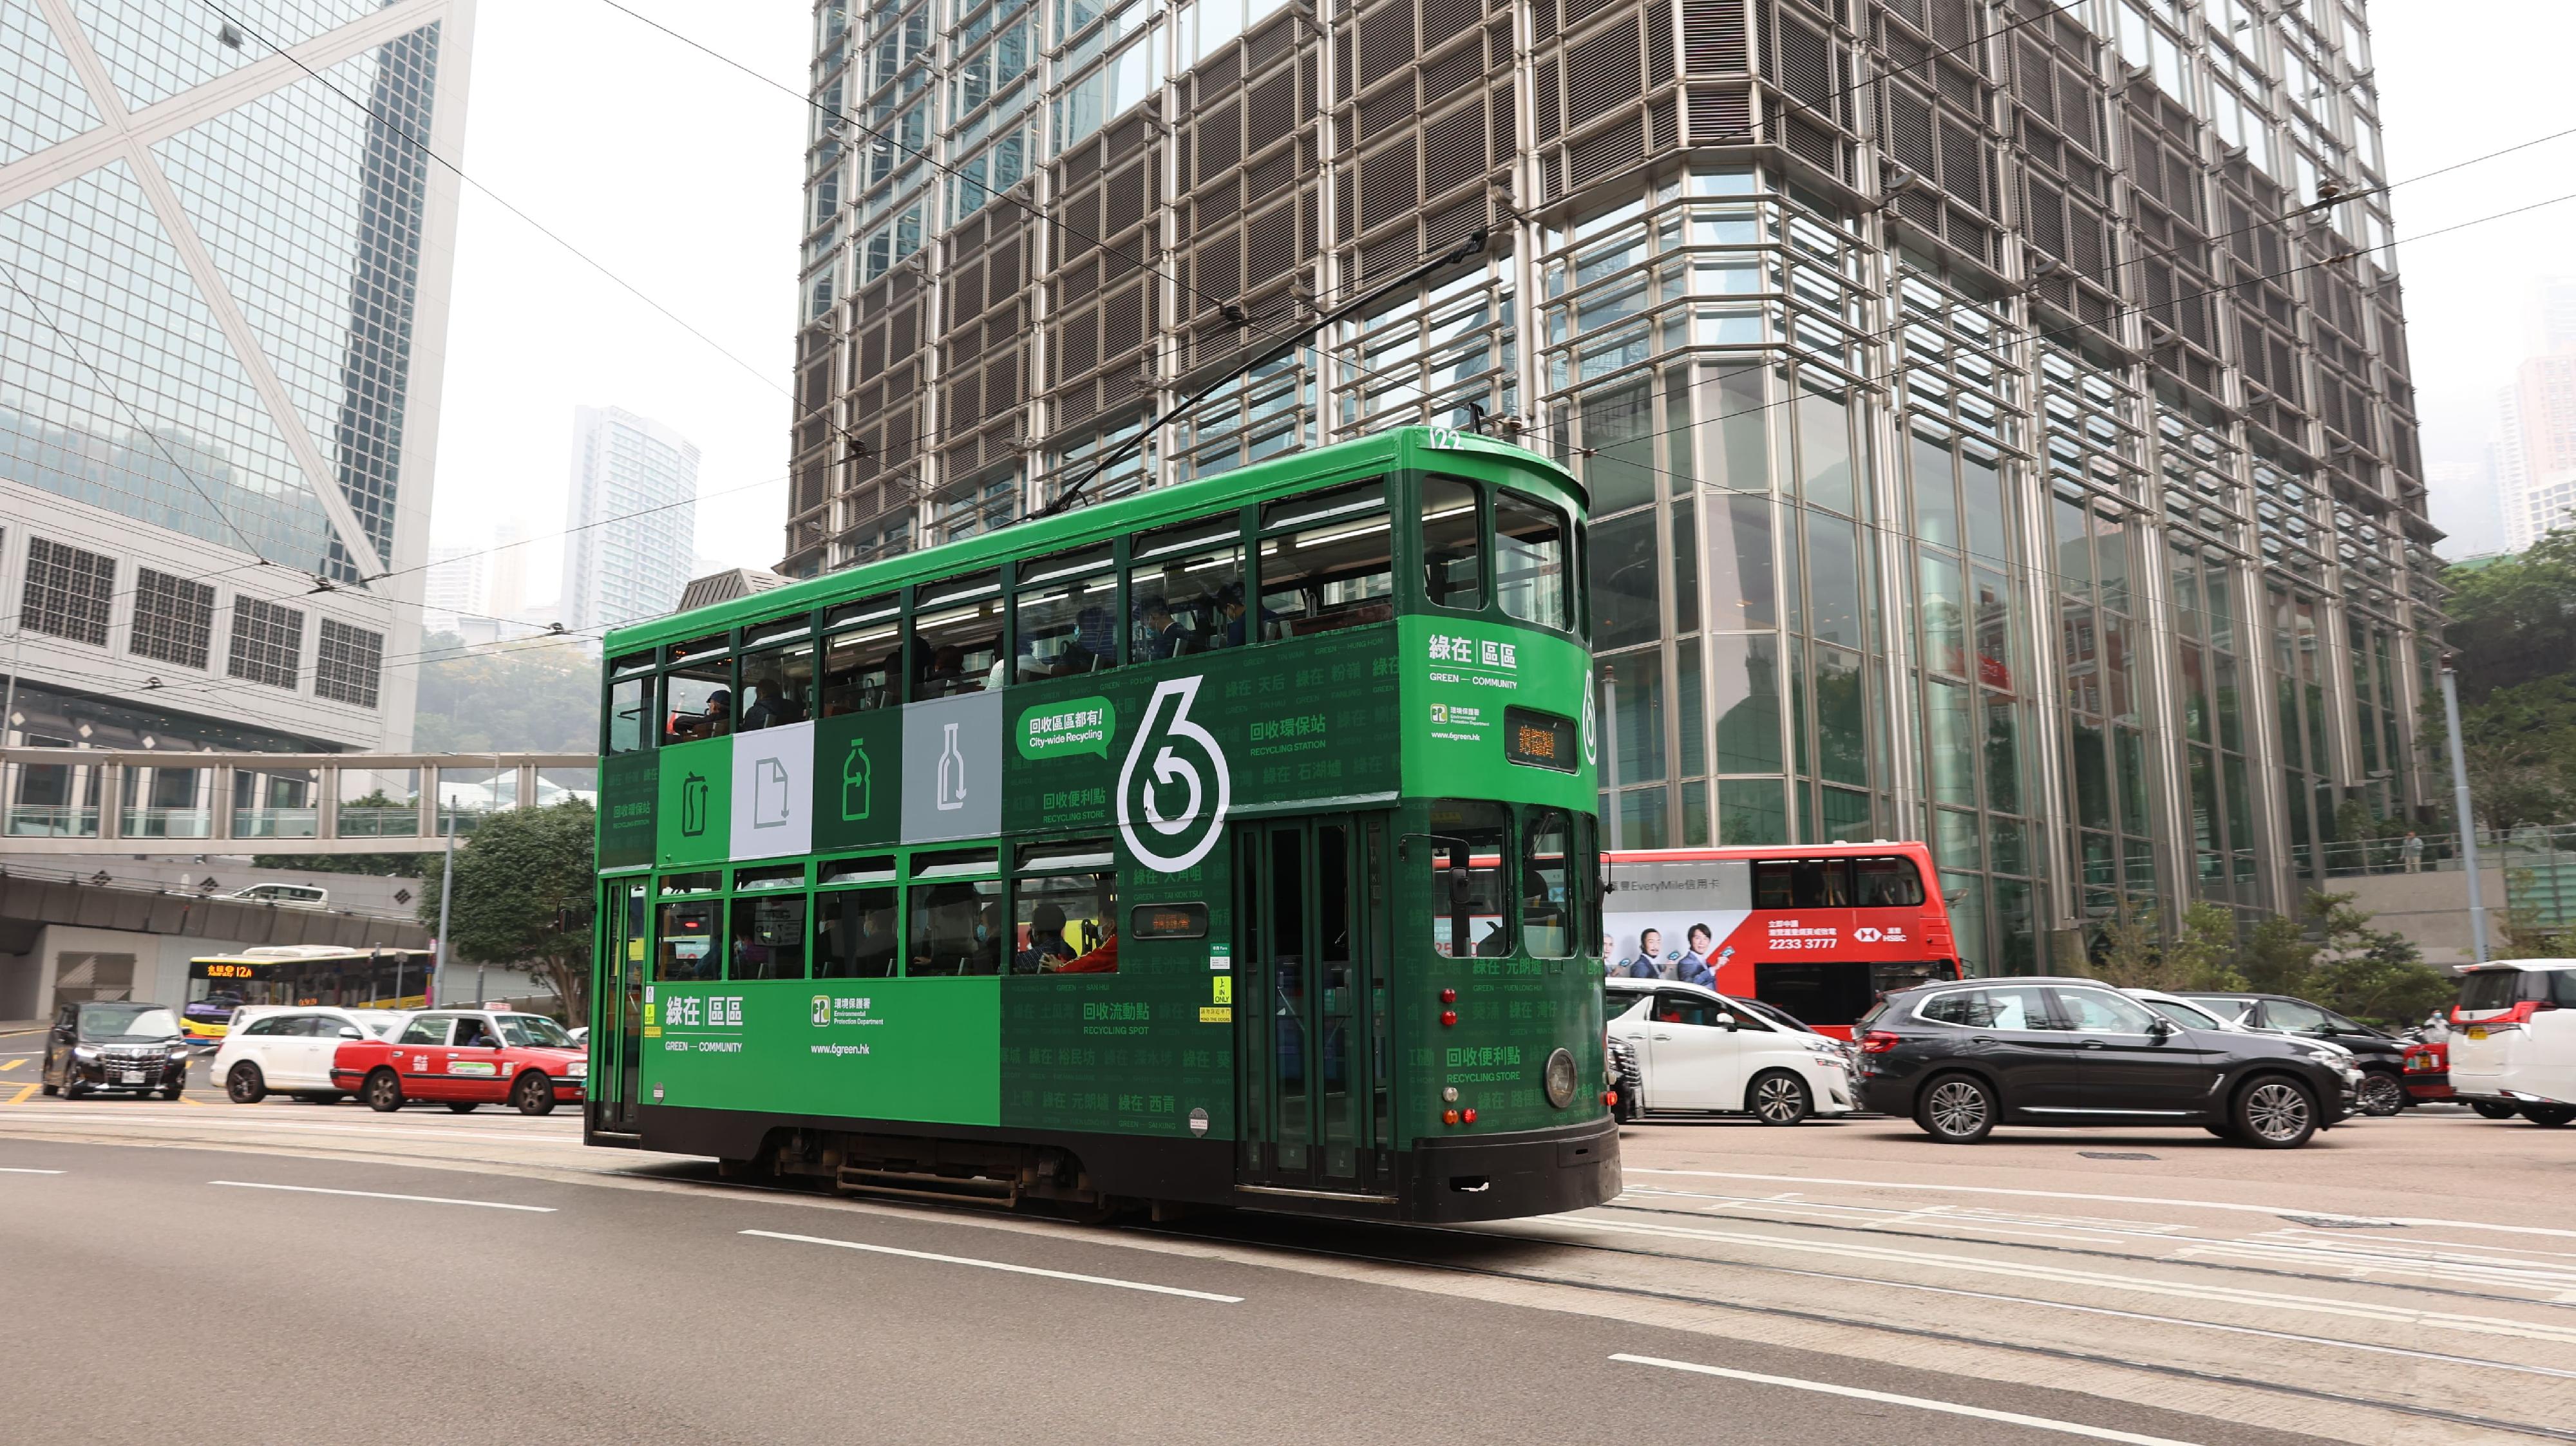 The Environmental Protection Department has strengthened the publicity and promotion of the enhanced services of the community recycling network on public transport, and encourages members of the public to go to the GREEN@COMMUNITY facilities for recycling. Picture shows an advertisement on a tram.